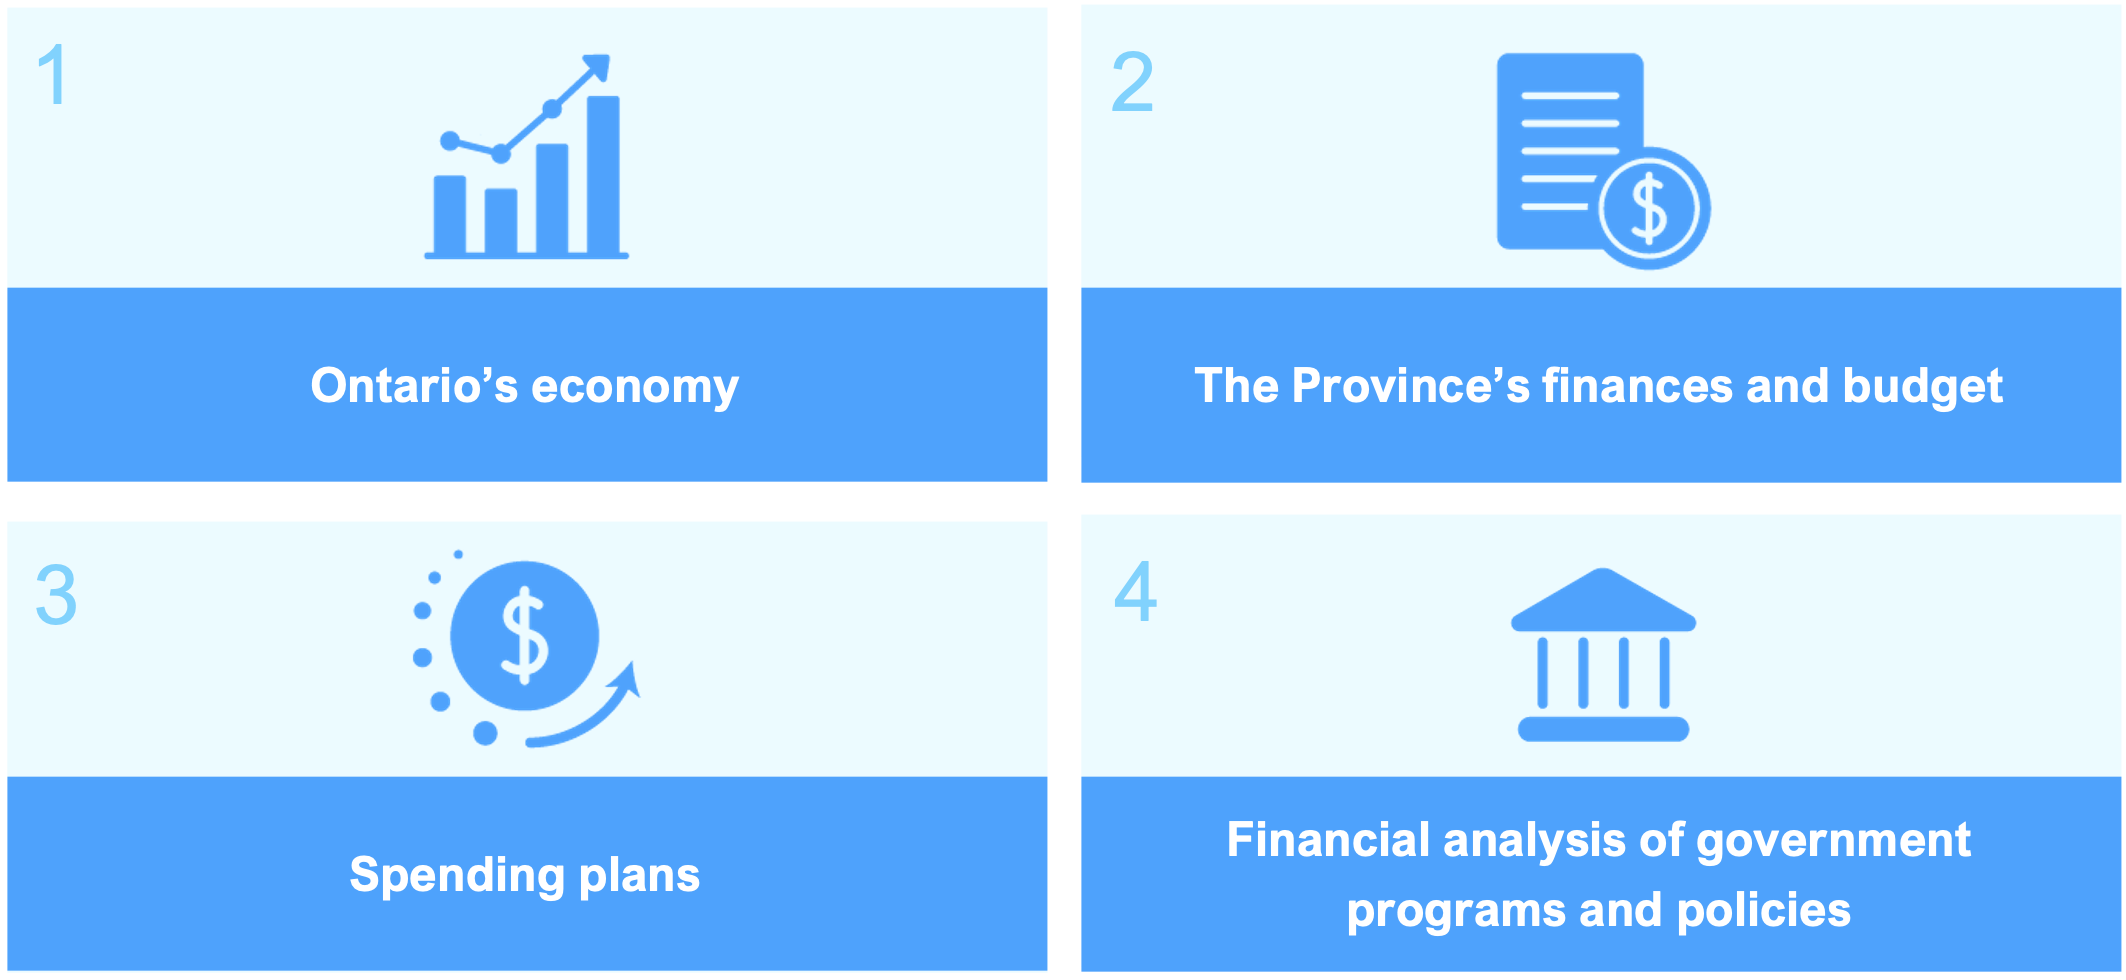 1. Ontario's economy 2. The Province's finances and budget 3.Spending Plans 4. Financial analysis of government programs and policies